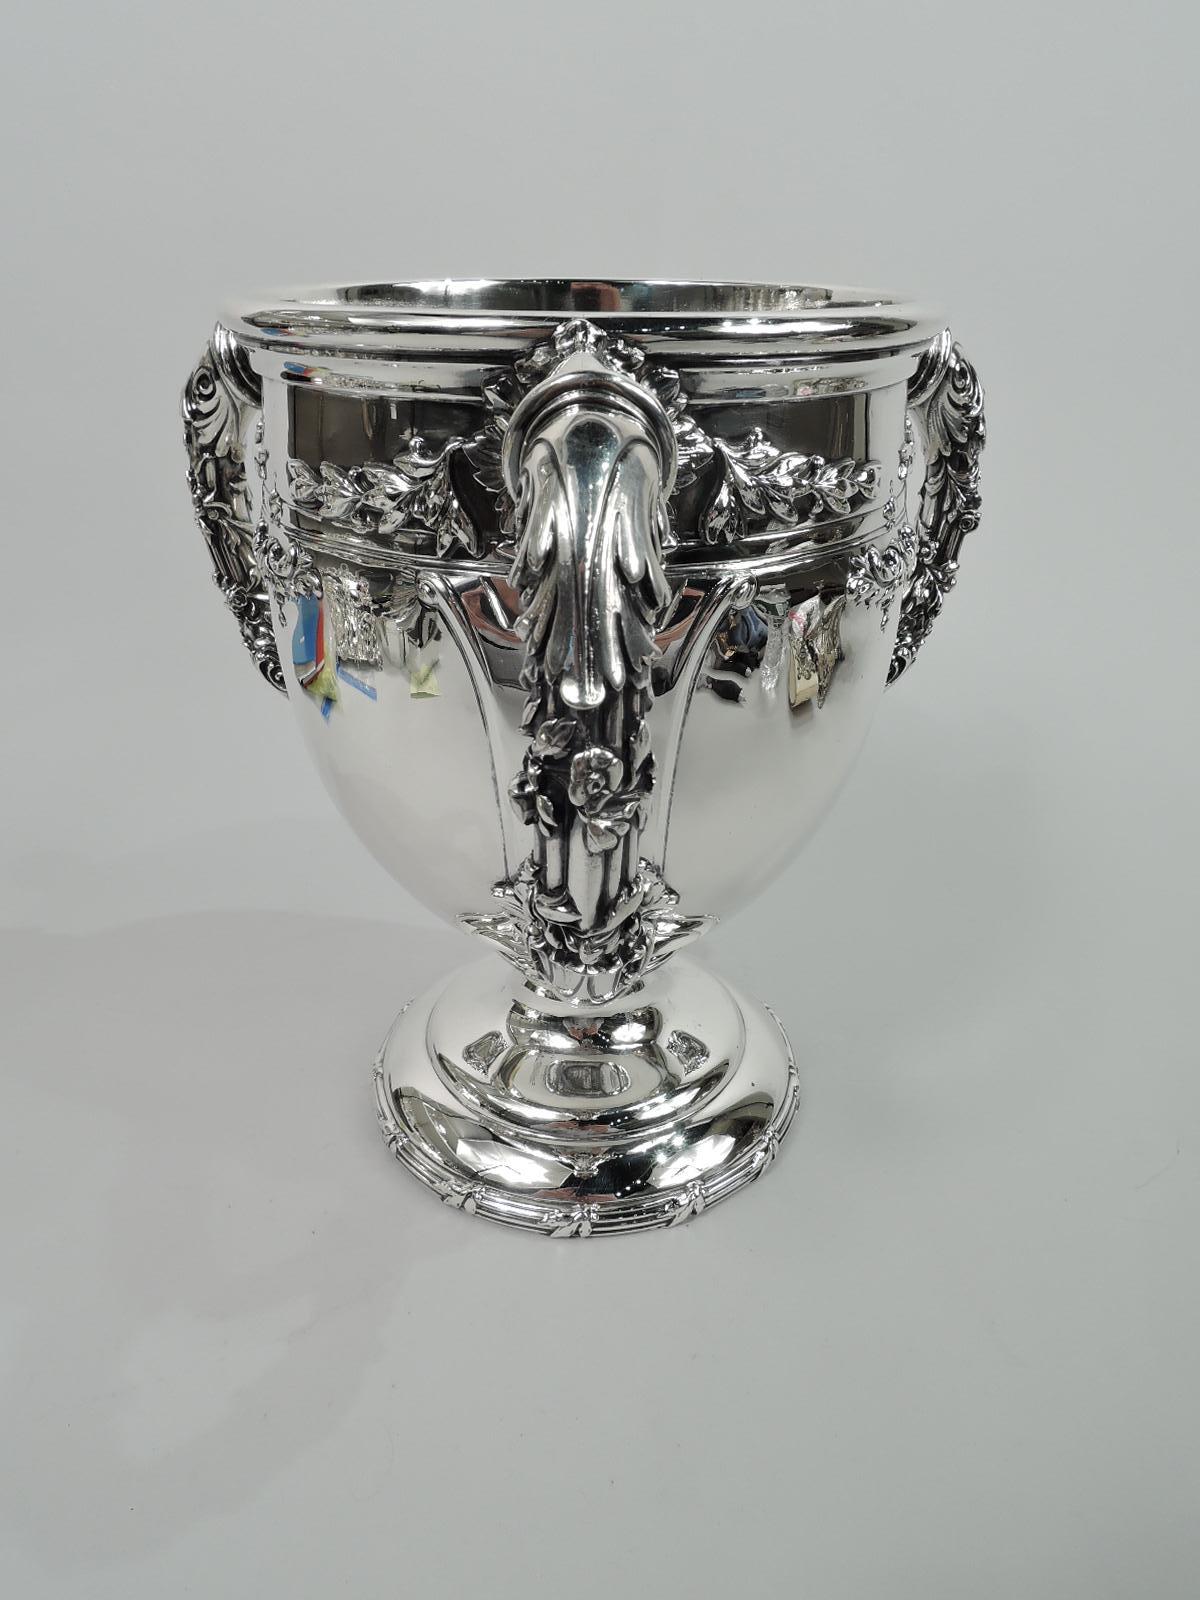 Turn-of-the-century Gilded Age sterling silver loving cup. Made by Theodore B. Starr in New York. Curved and tapering bowl on double-domed foot. Three leaf-mounted and -capped garland-entwined handles. Chased leaves. Reeding. Curvilinear strapwork